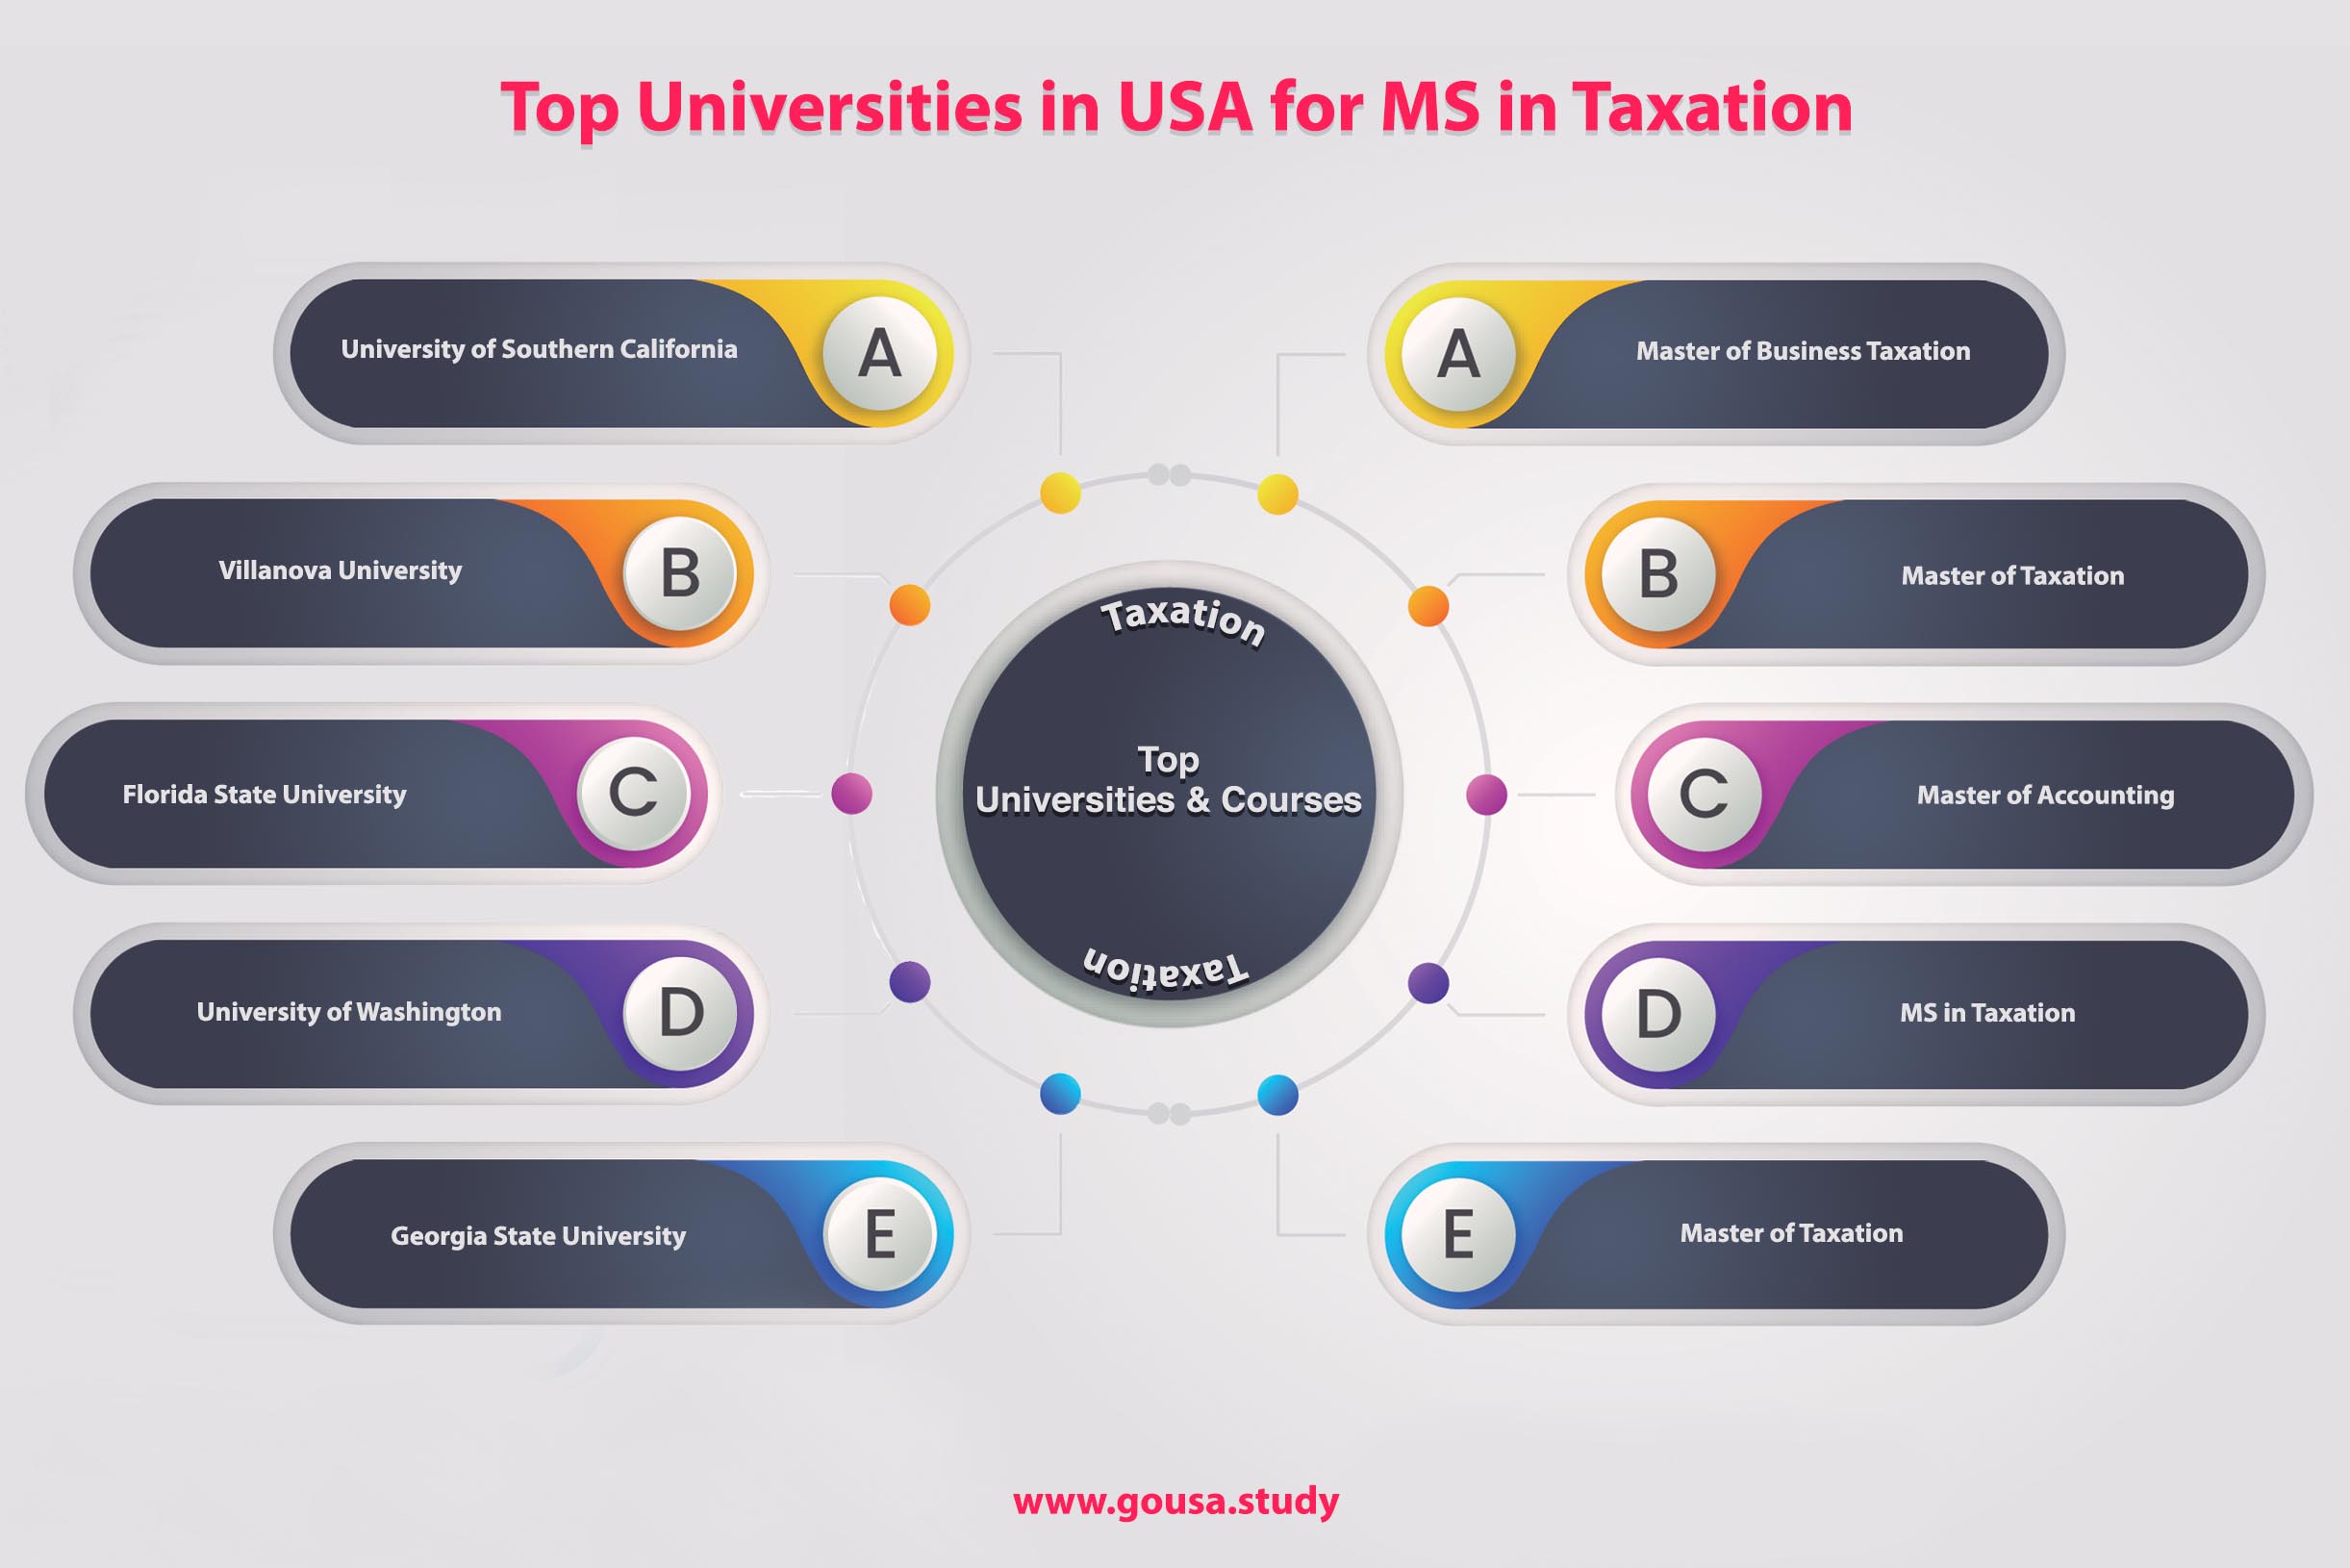 Top Universities in USA for MS in Taxation